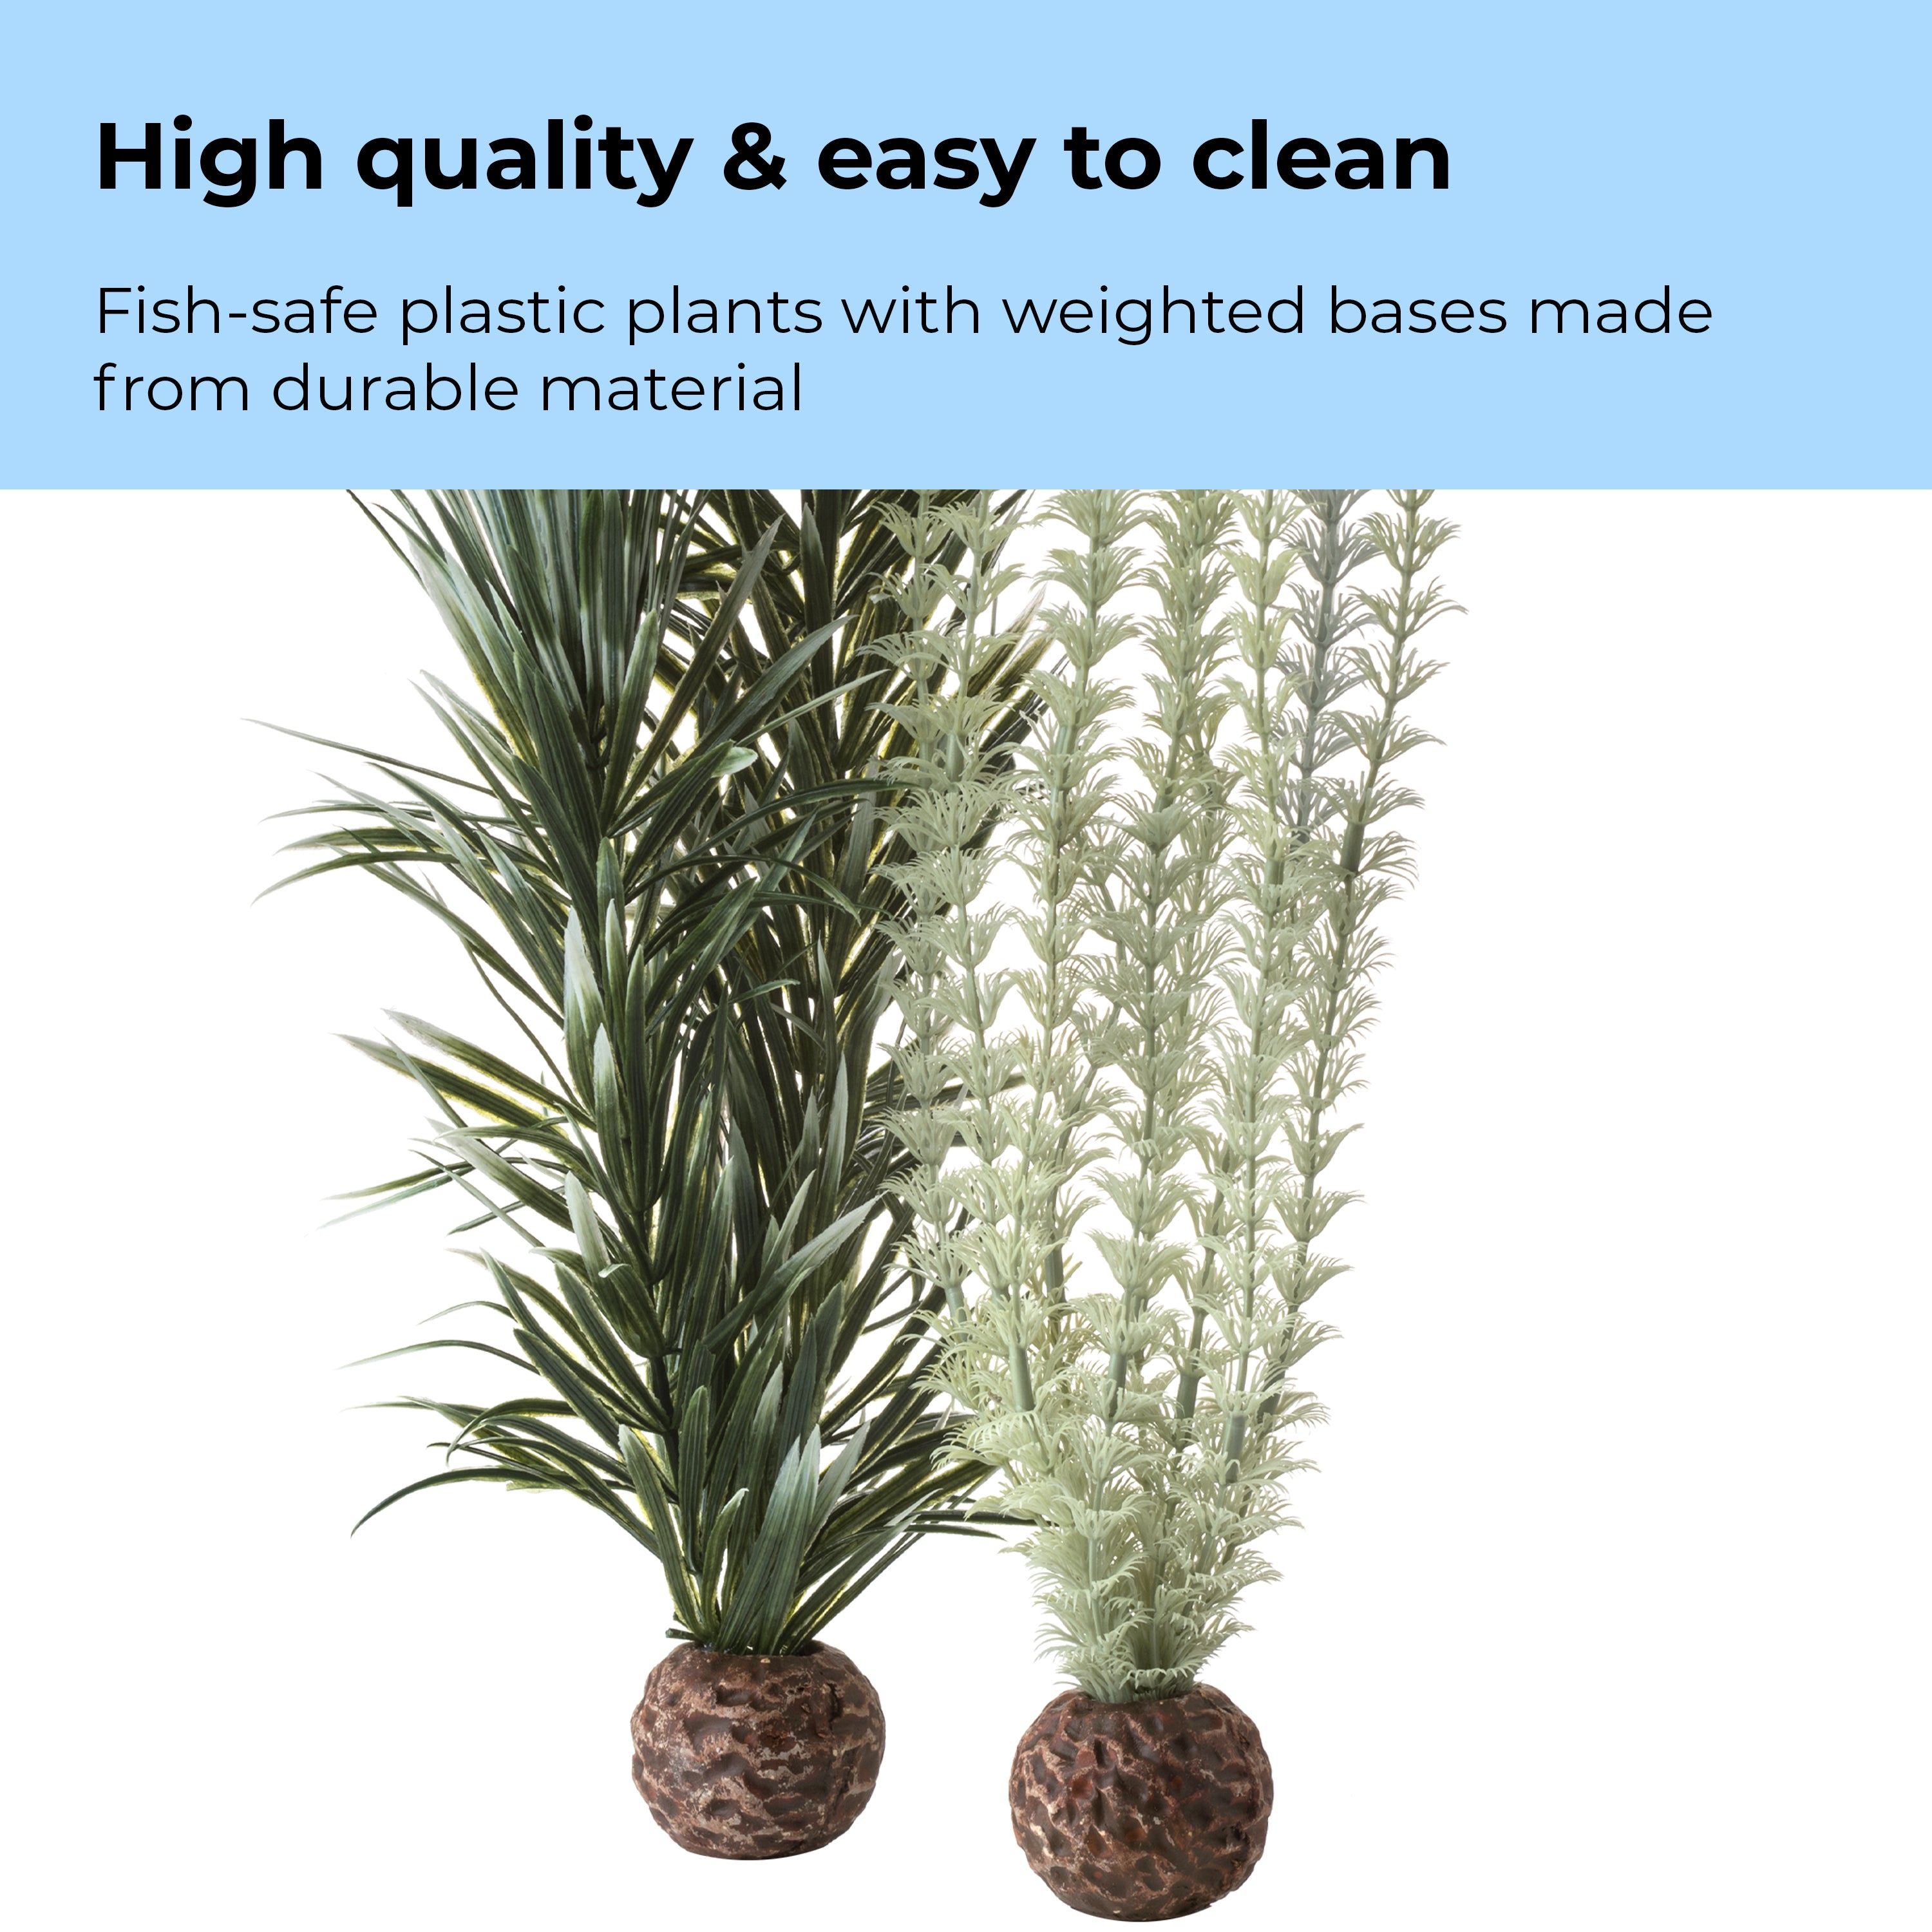 Grey-Green Ambulia Plant Set, large - High quality & easy to clean